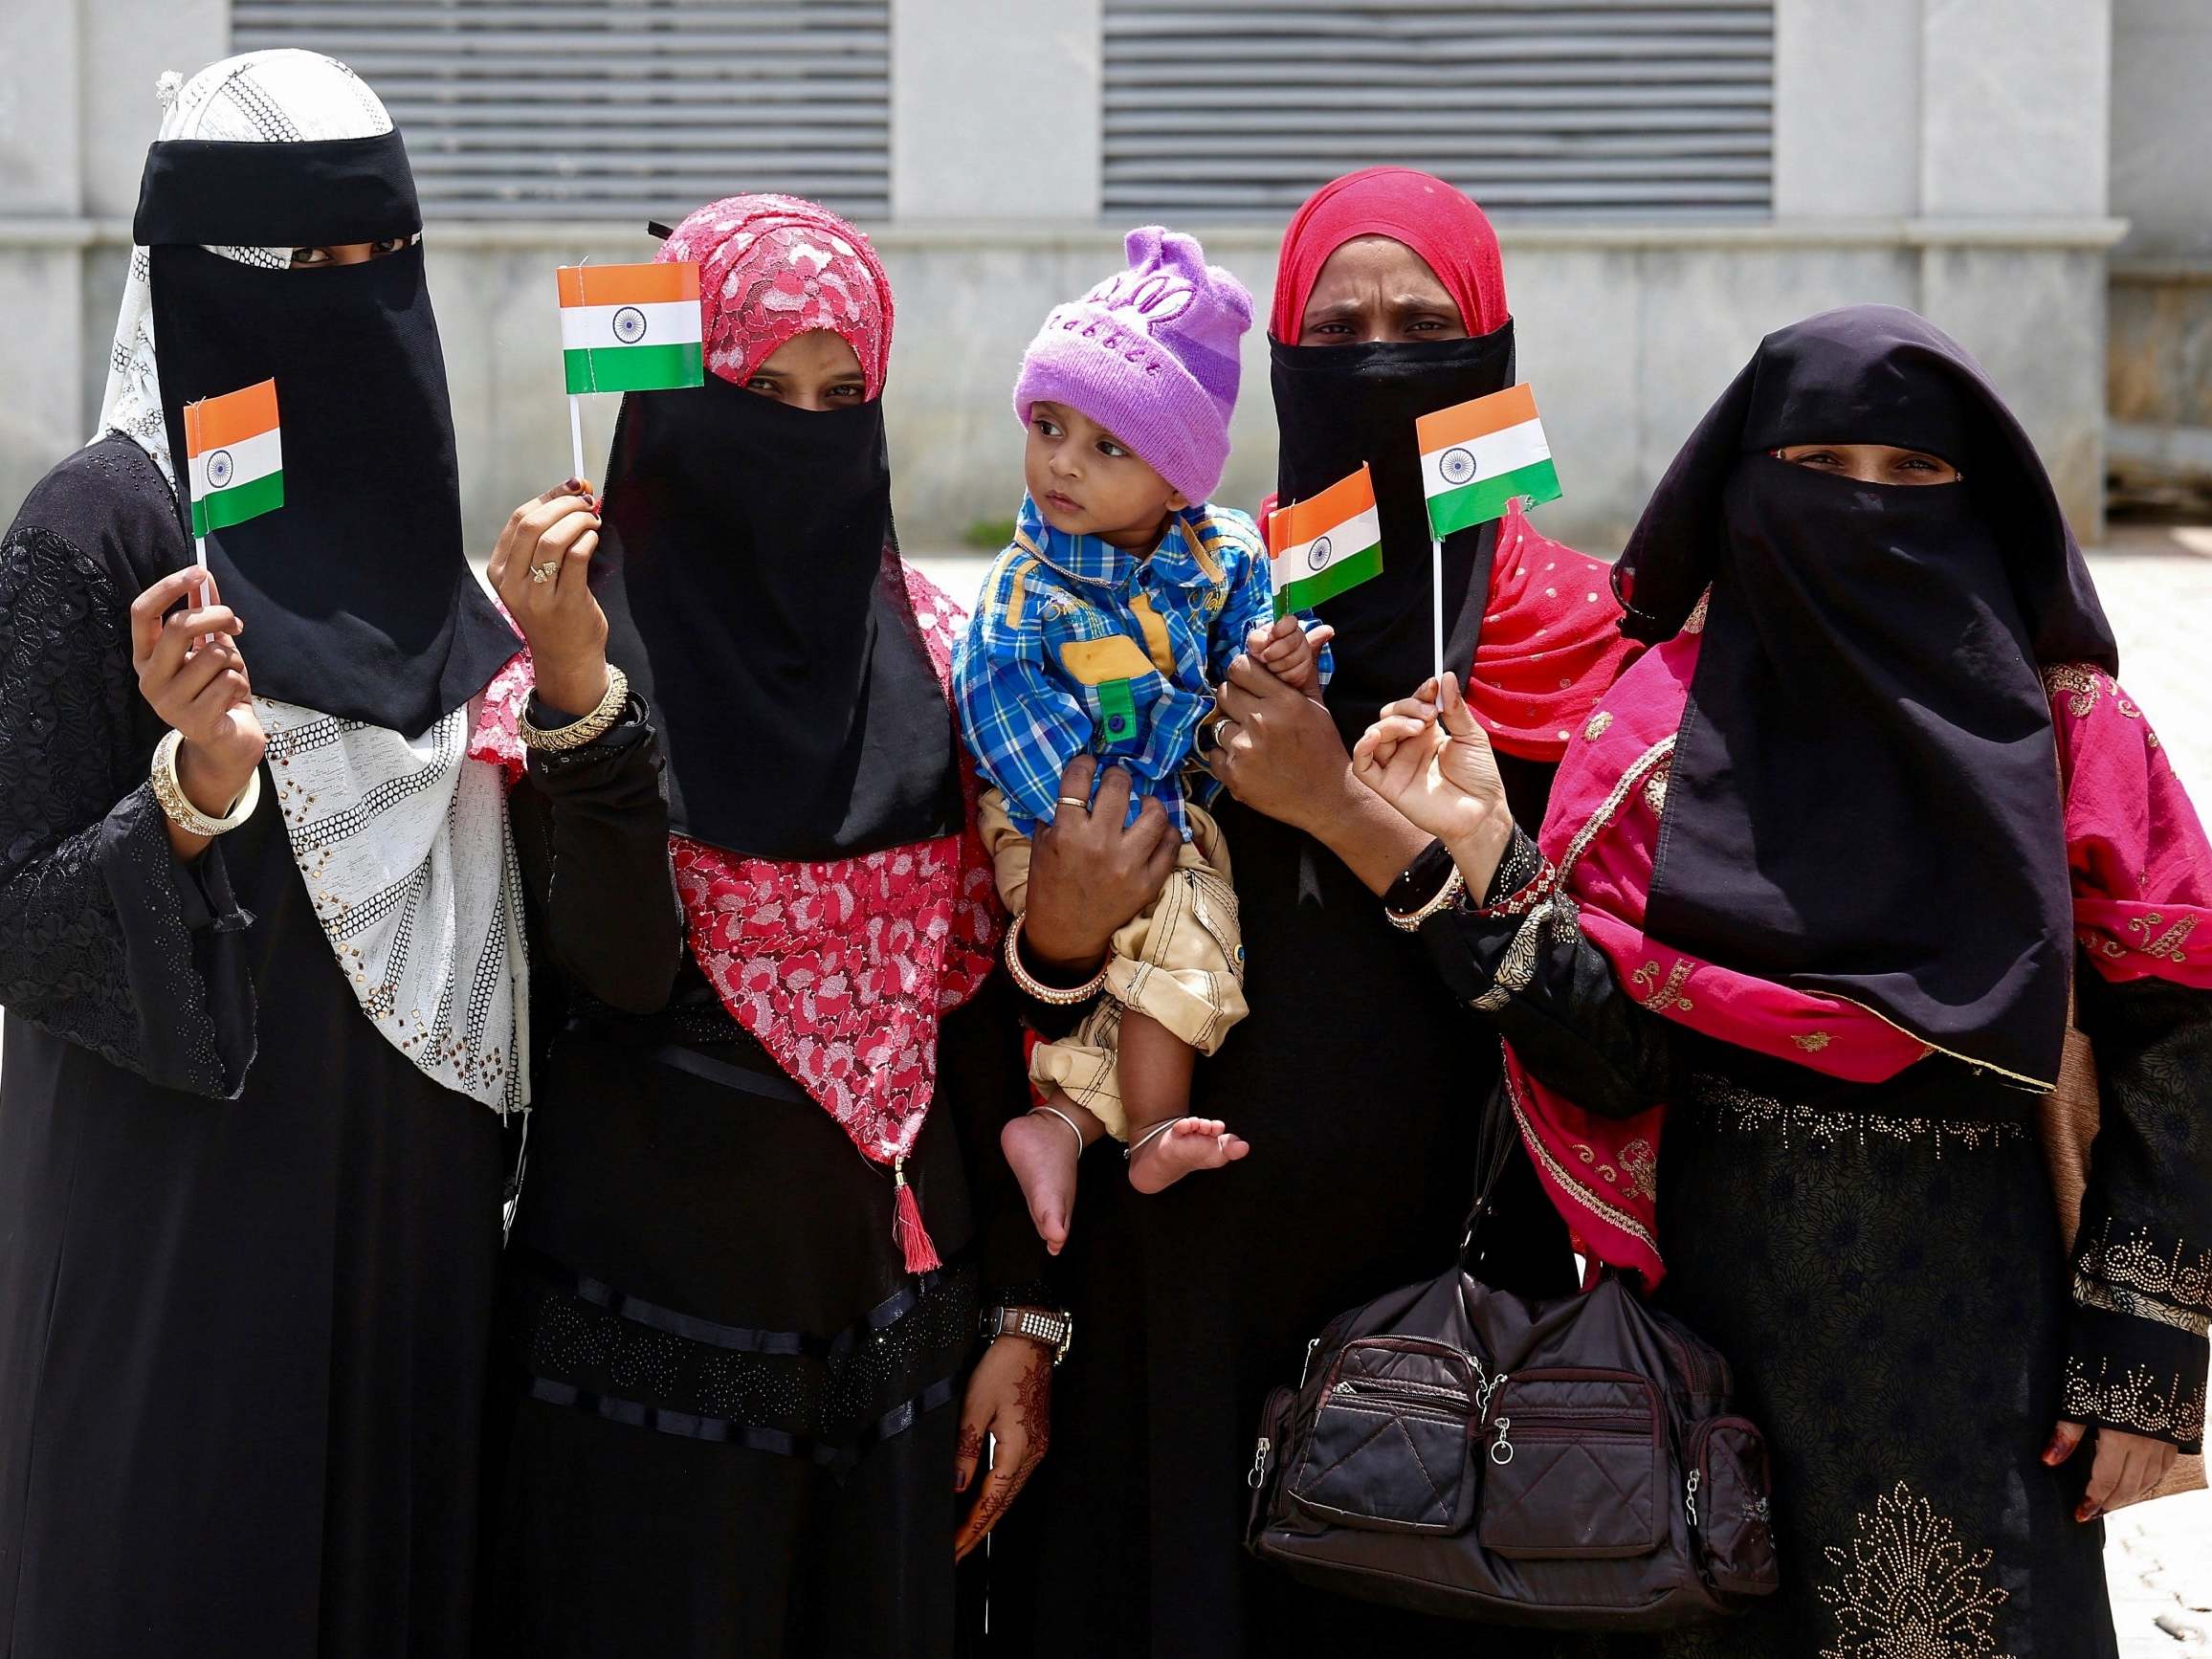 Indian Muslim women pose with Indian flags as part of the Independence Day celebrations in Bengaluru city on 15 August 2019